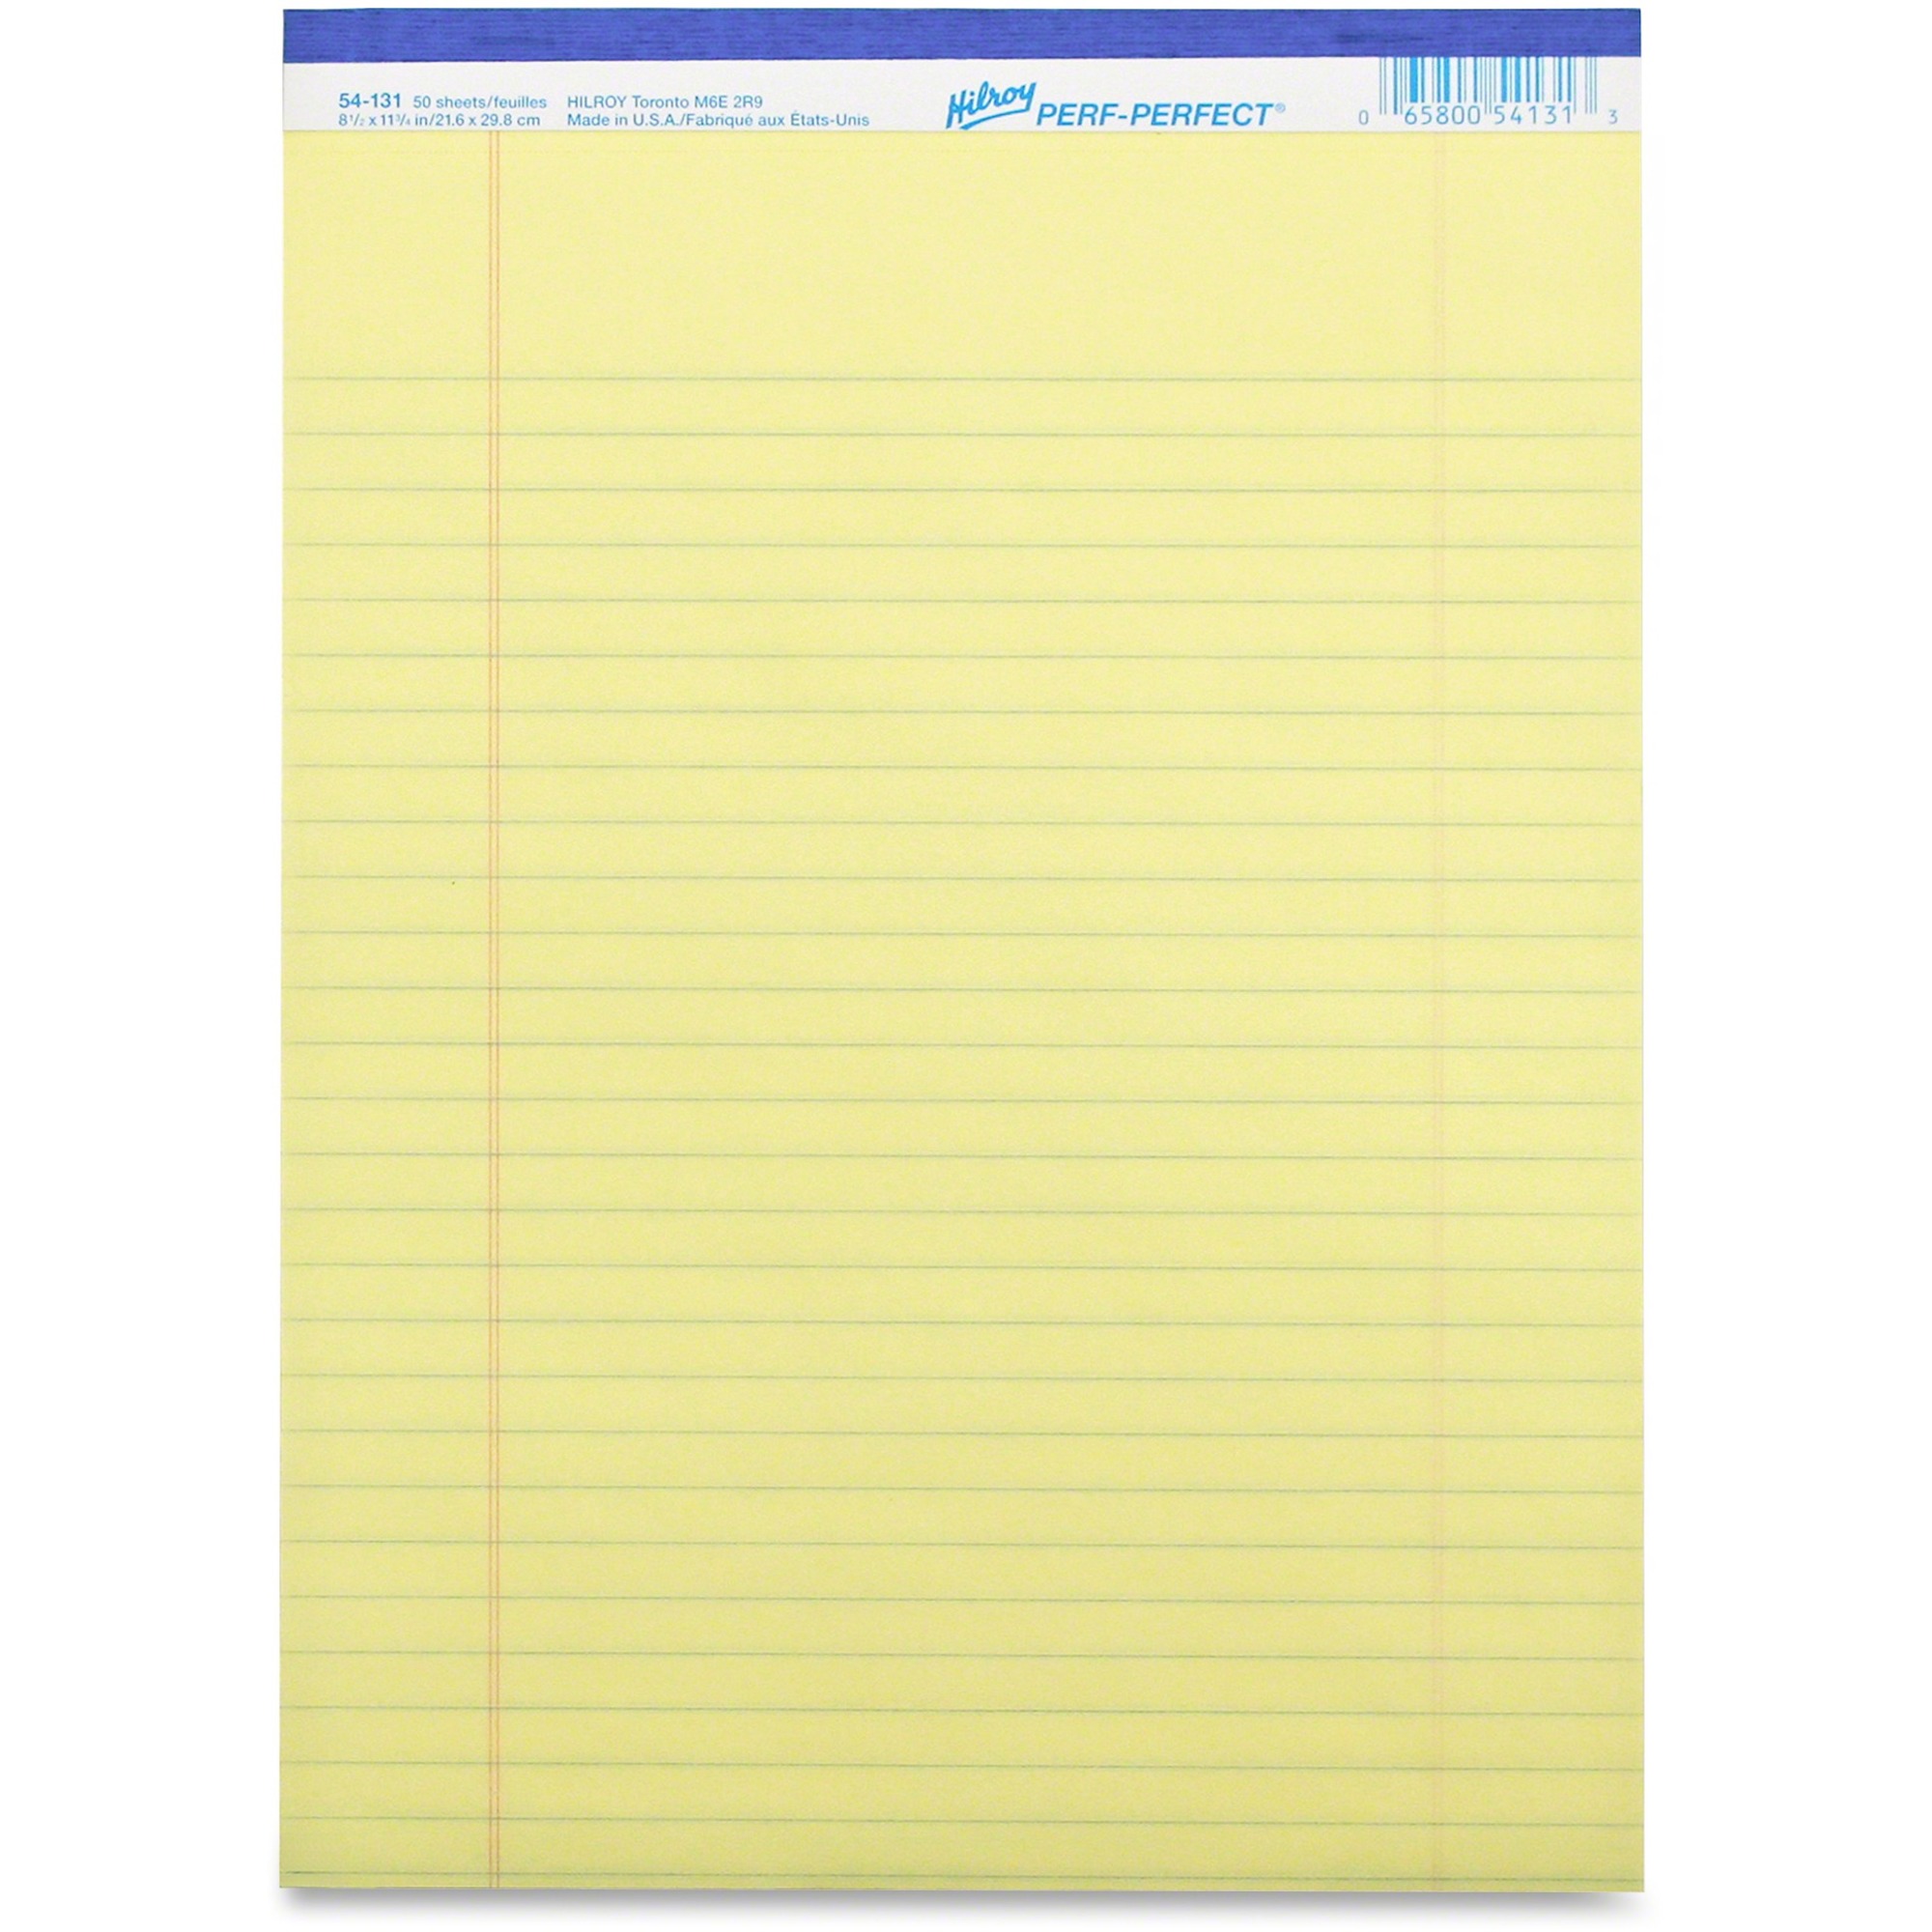 Hilroy Micro Perforated Business Notepad - 10/Pack